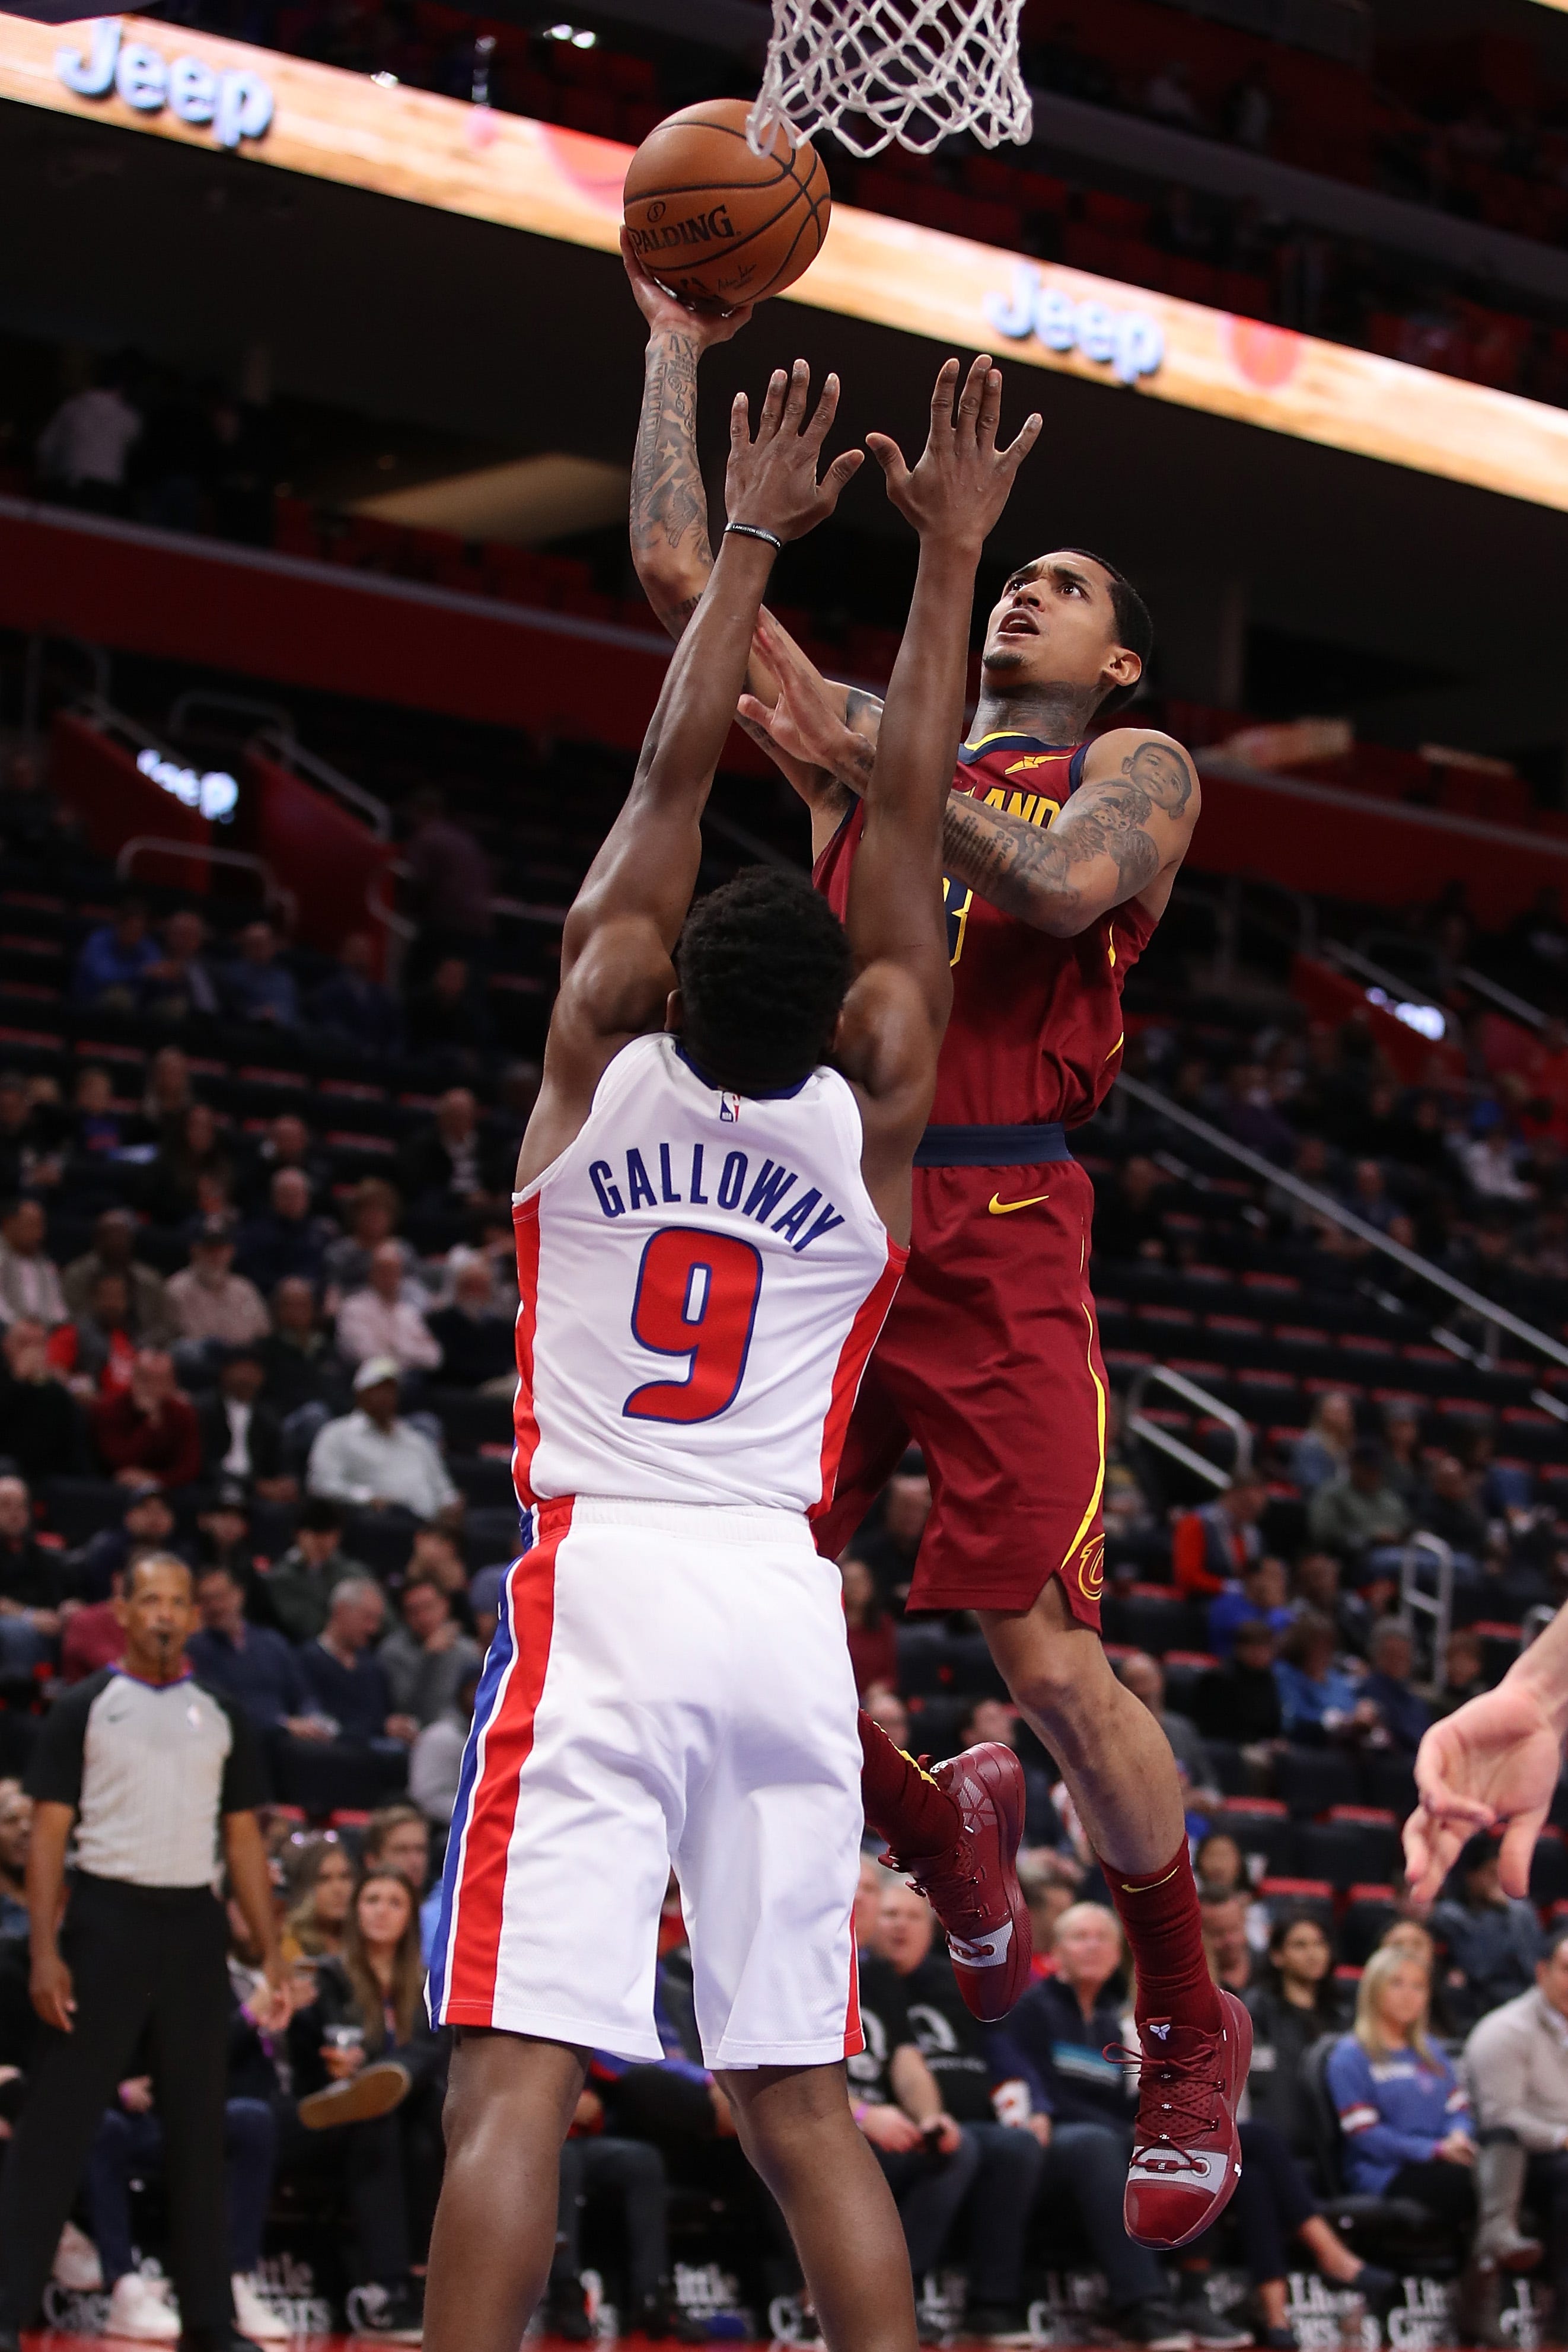 Larry Nance Jr. (22) of the Cleveland Cavaliers takes a shot over Langston Galloway (9) of the Detroit Pistons during the first half.